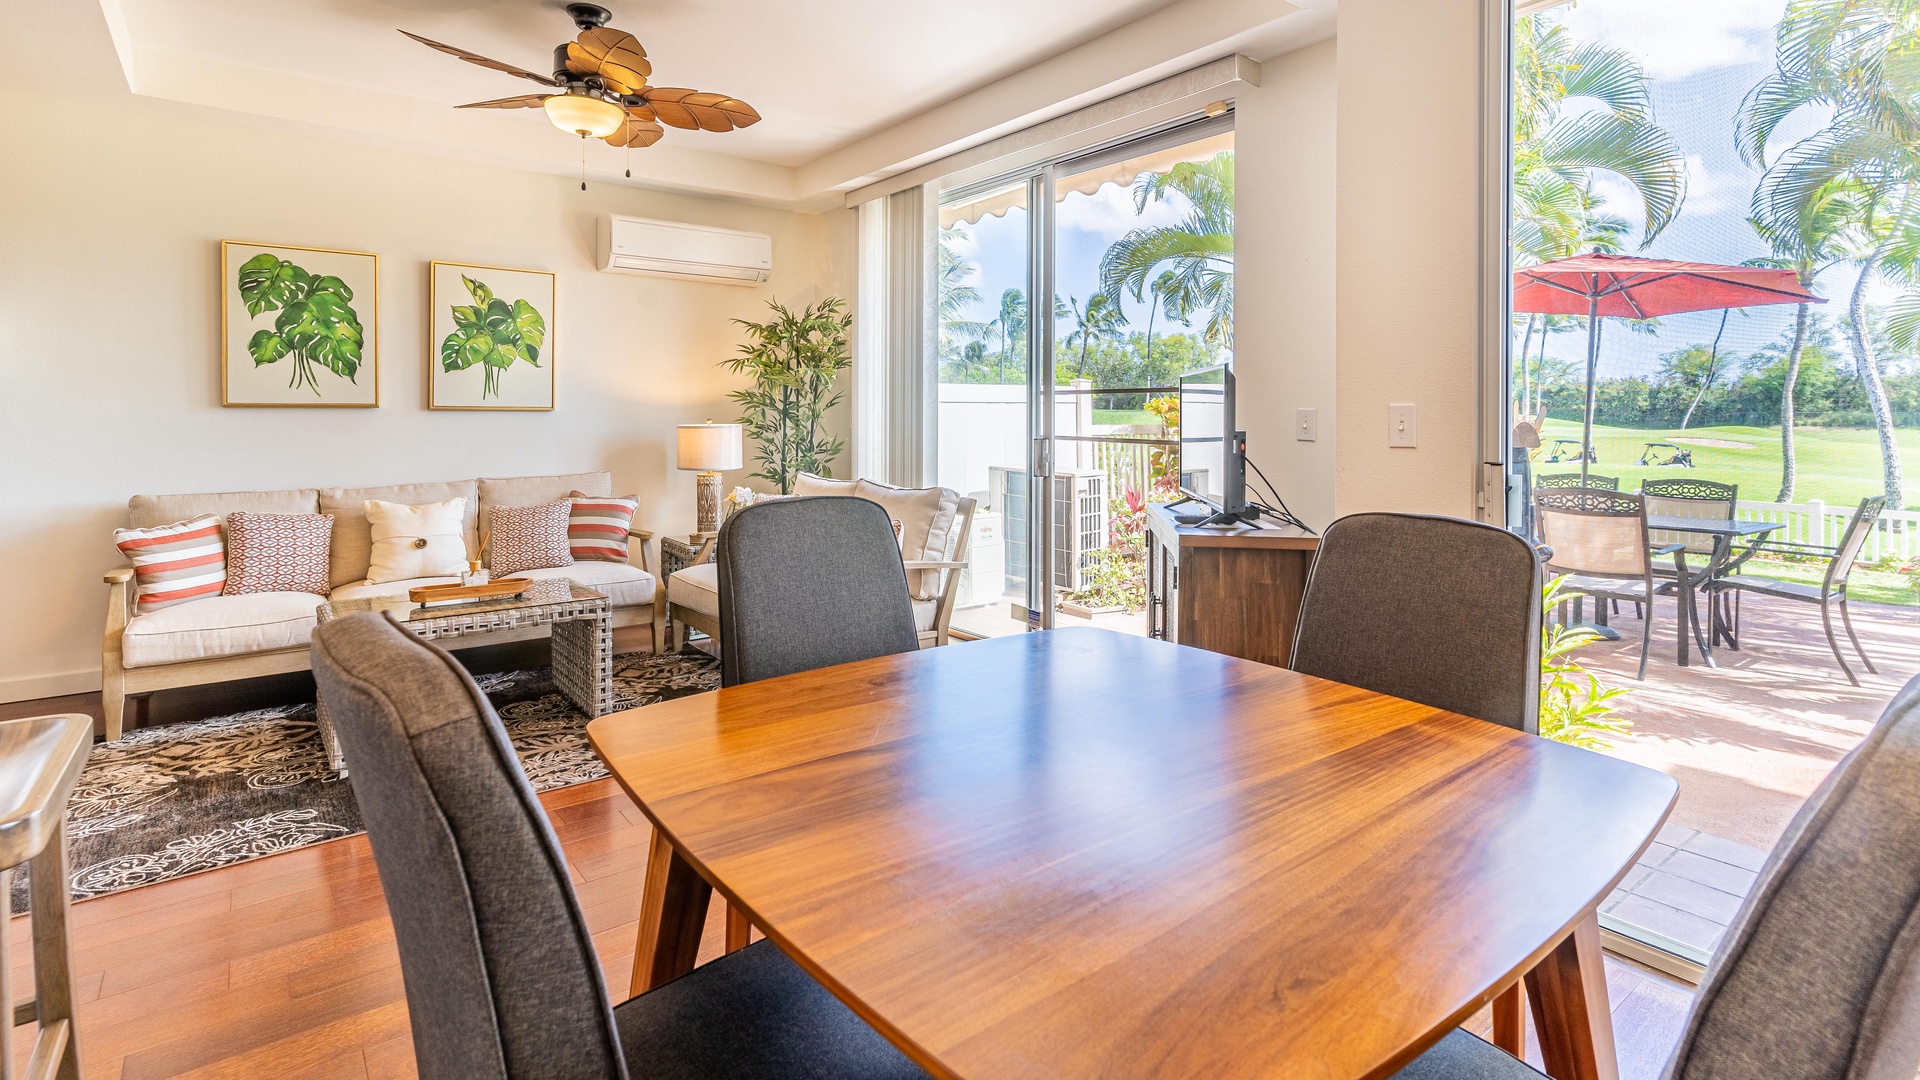 Kapolei Vacation Rentals, Fairways at Ko Olina 20G - Plenty of seating and natural lighting in this seamless living and dining area.